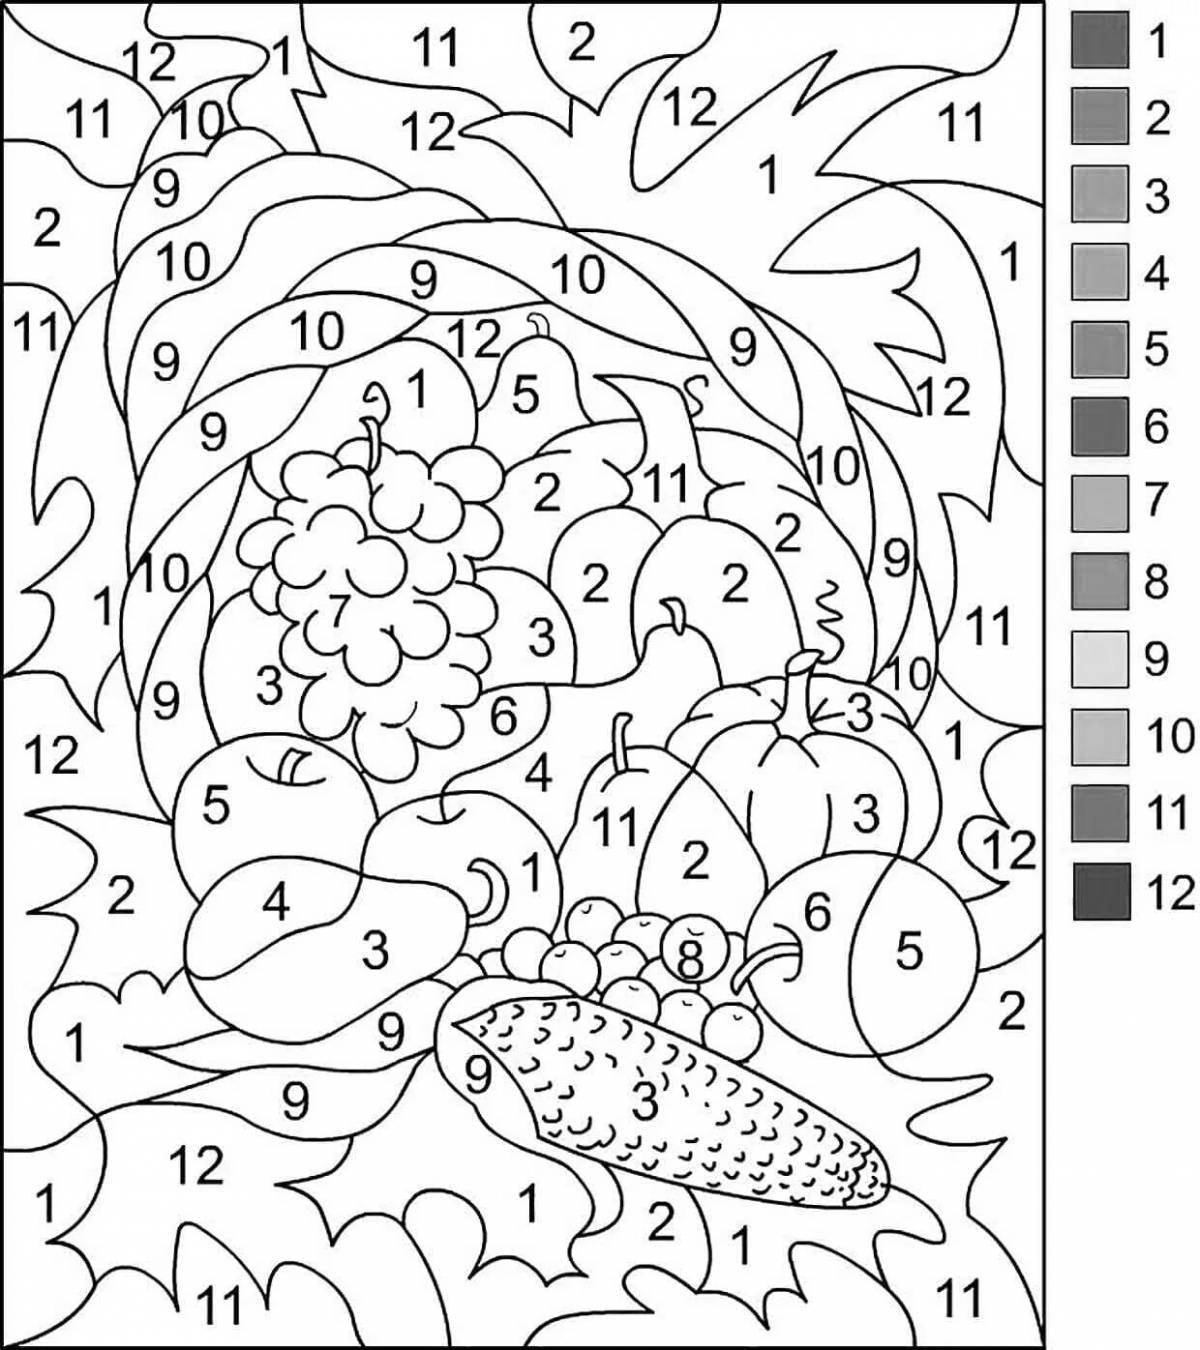 Color-explosion coloring page by numbers senior group